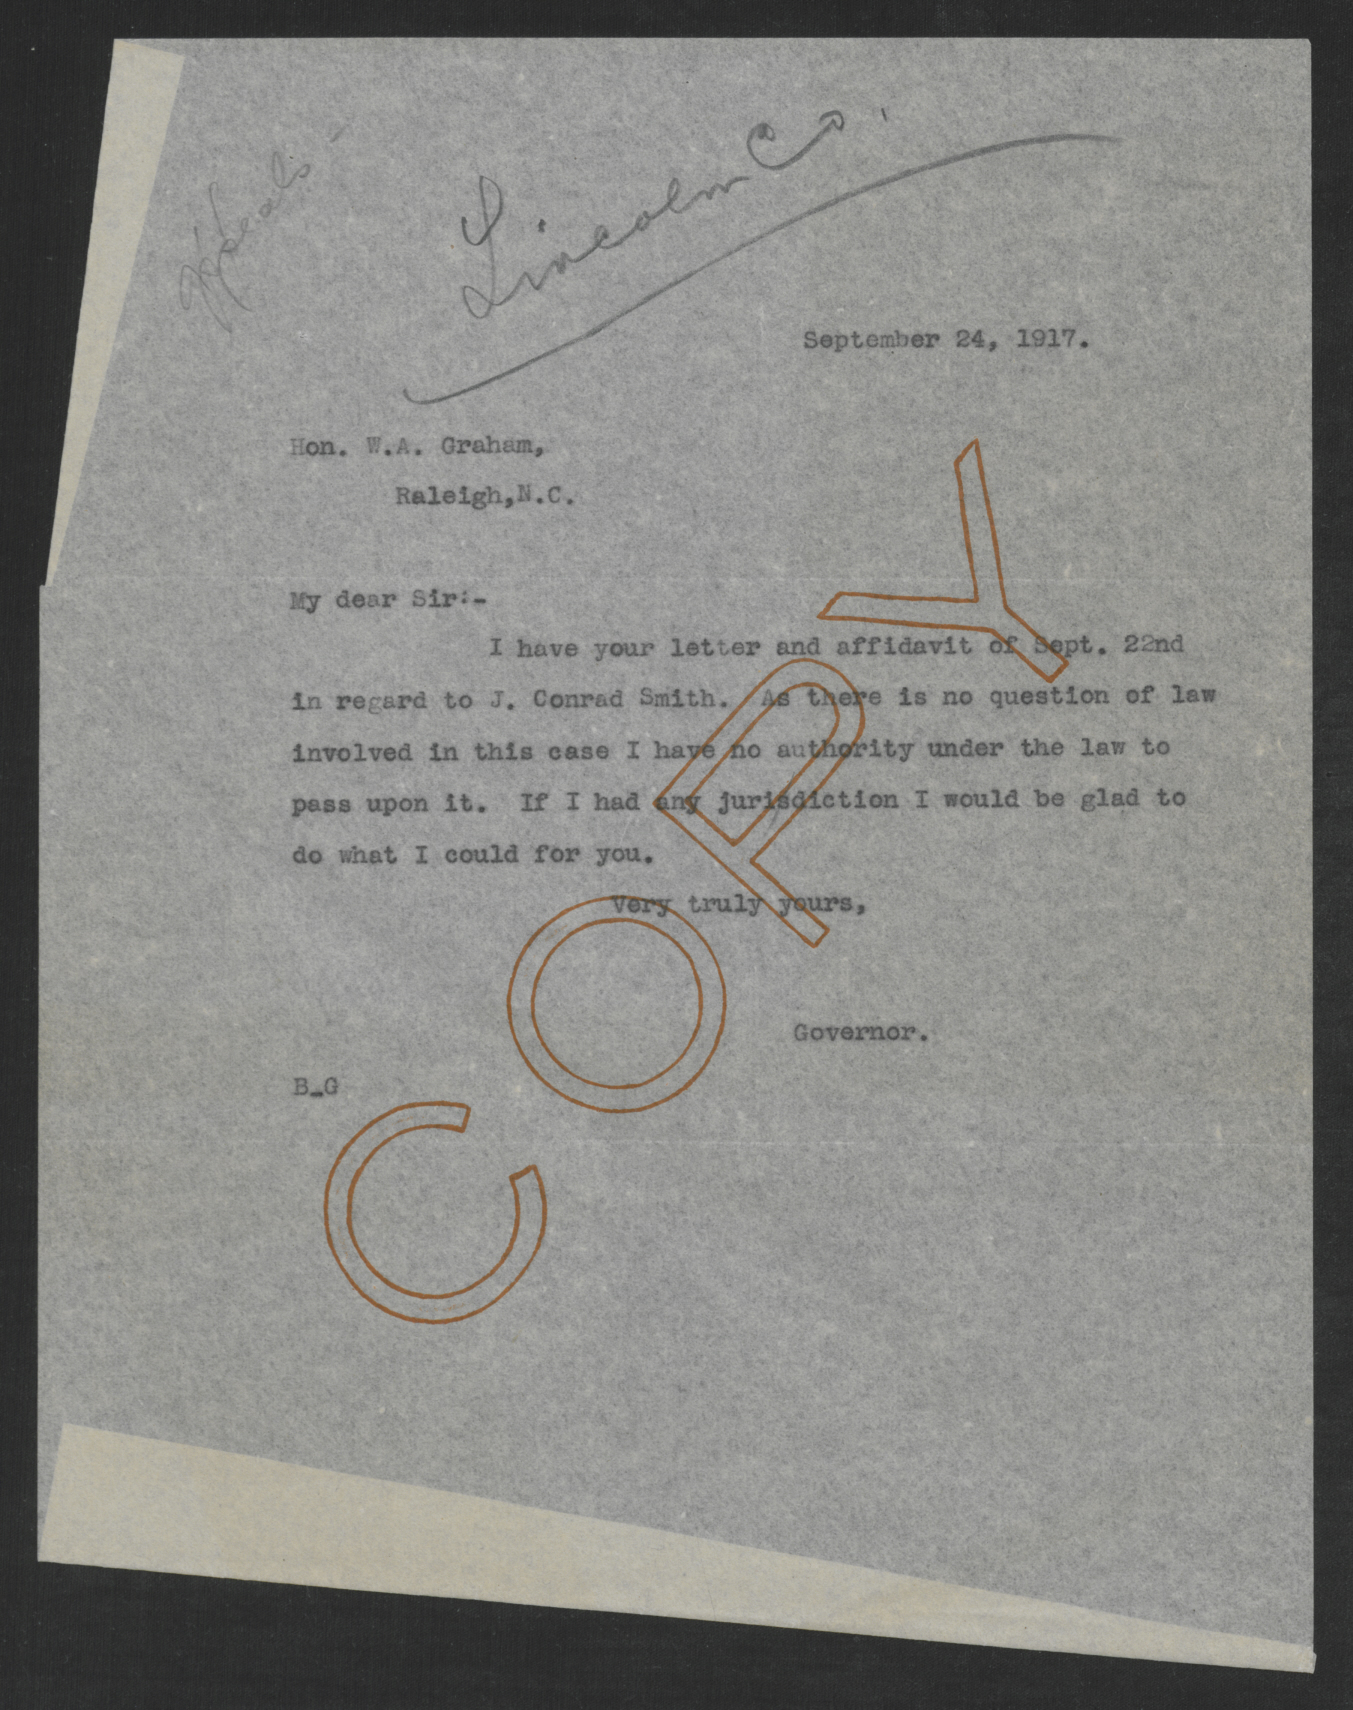 Letter from Thomas W. Bickett to William A. Graham, September 24, 1917